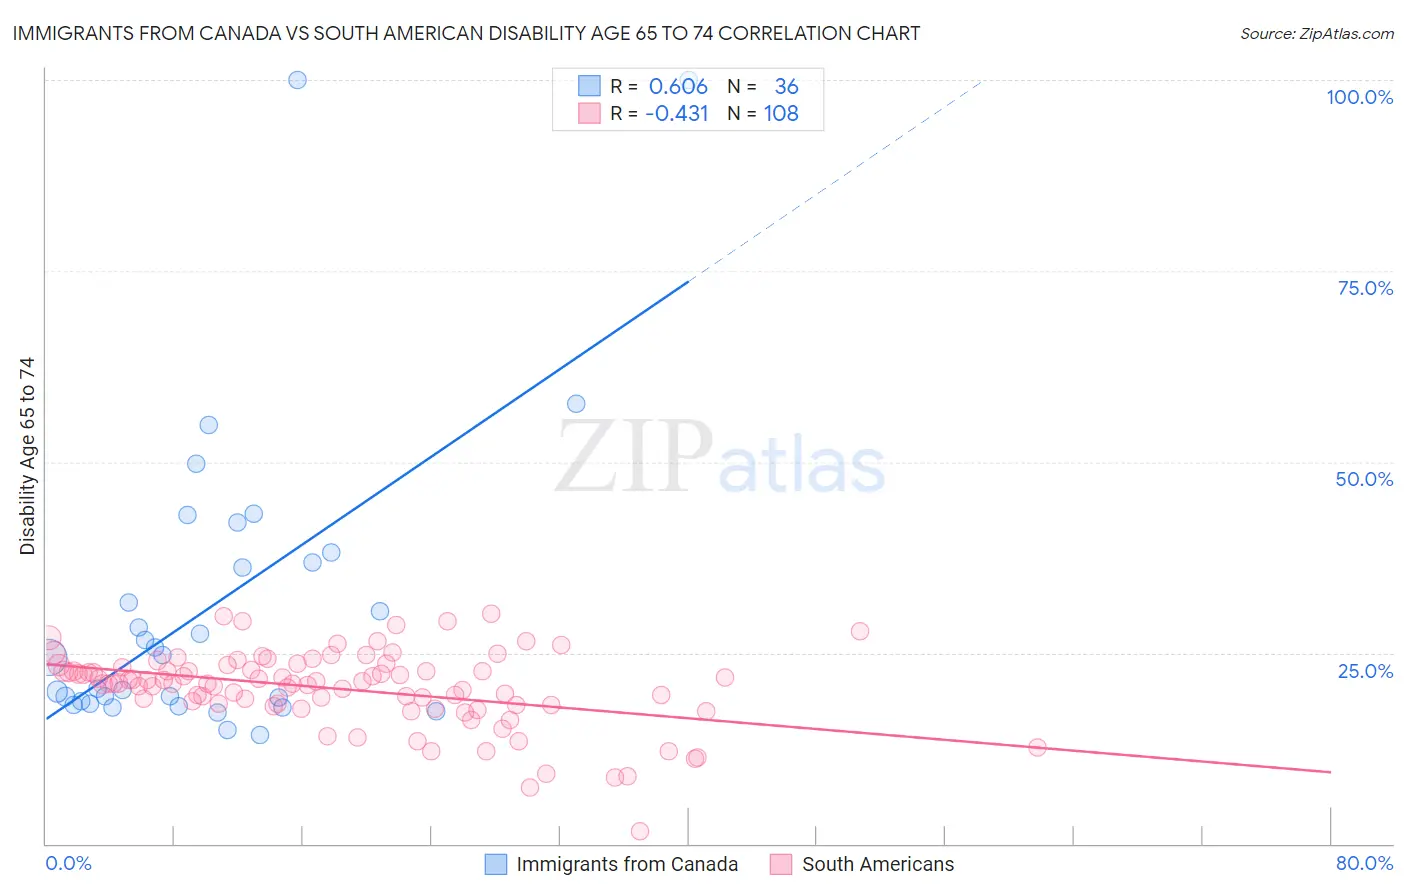 Immigrants from Canada vs South American Disability Age 65 to 74